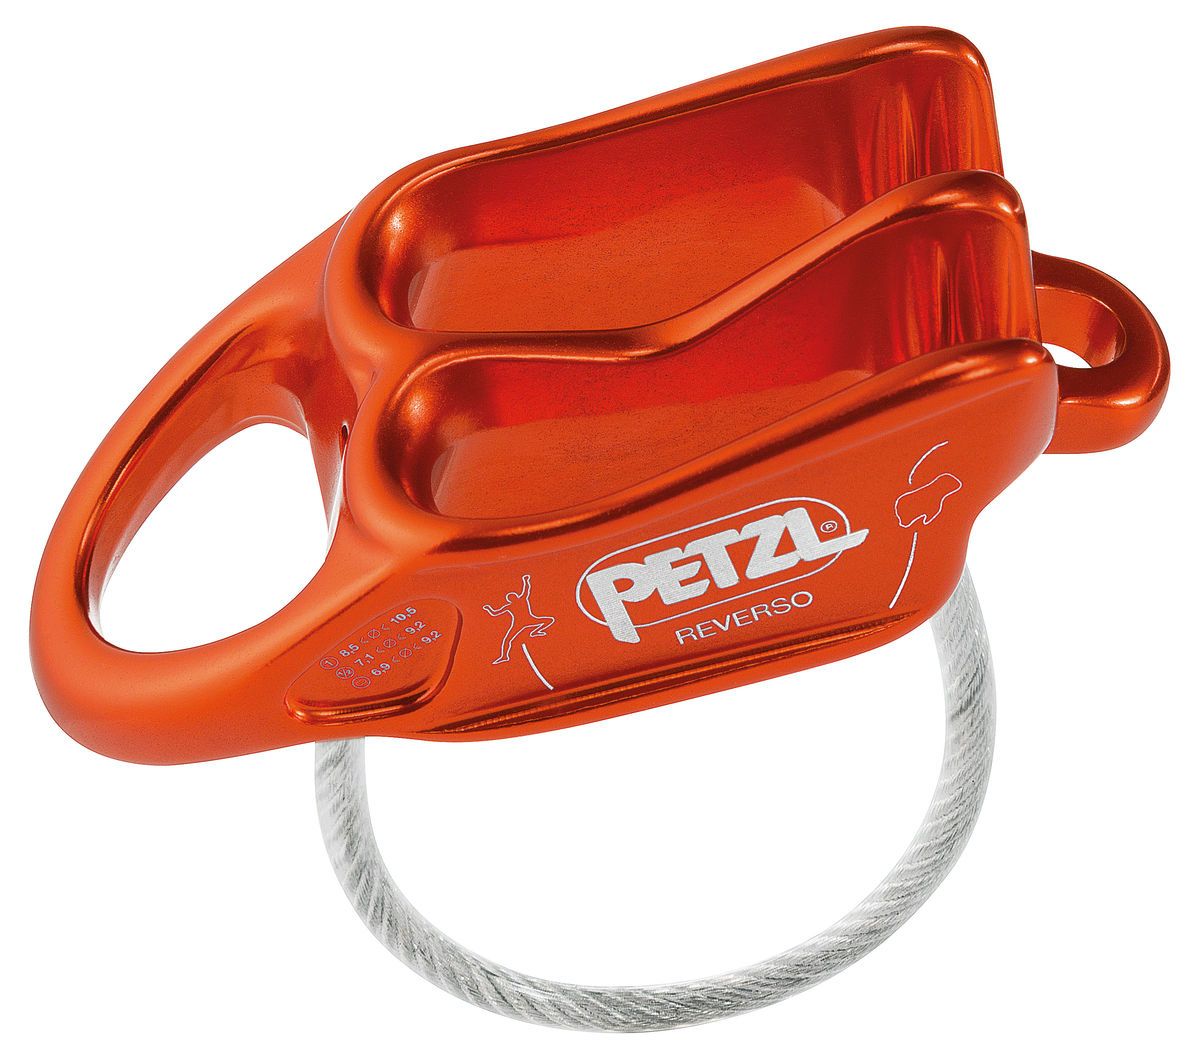 Petzl Reverso Taubrems Red